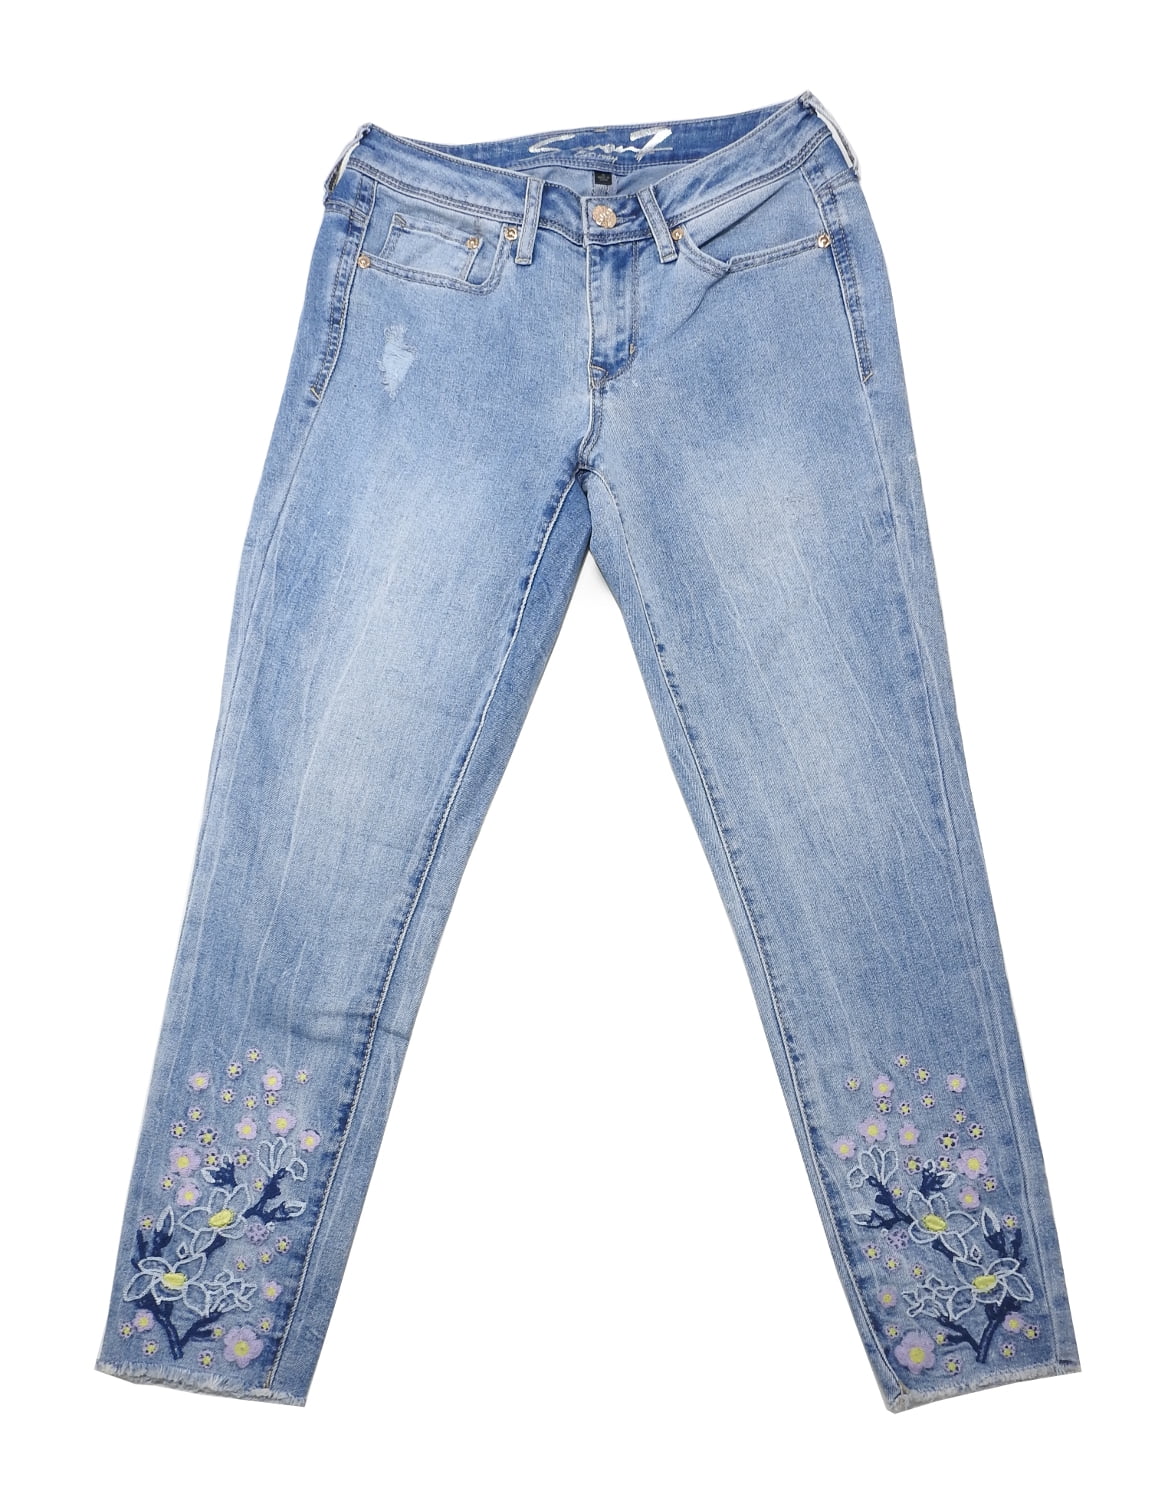 NWT Womens SEVEN 7 Percy Wash Blue Ankle Skinny Pink Floral Jeans Sz 8 $79